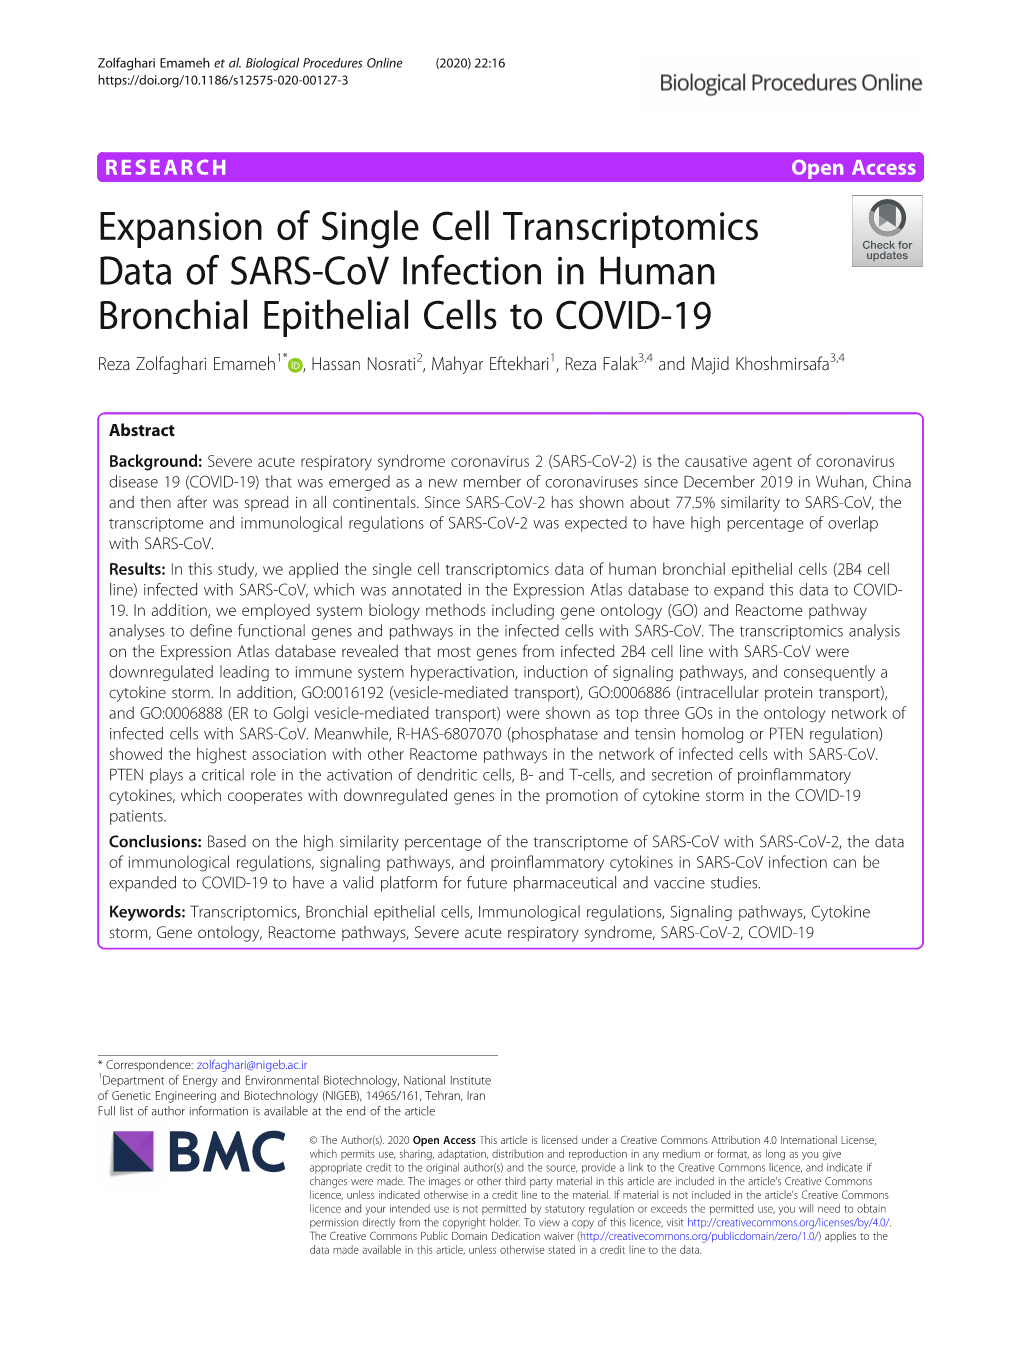 Expansion of Single Cell Transcriptomics Data of SARS-Cov Infection in Human Bronchial Epithelial Cells to COVID-19